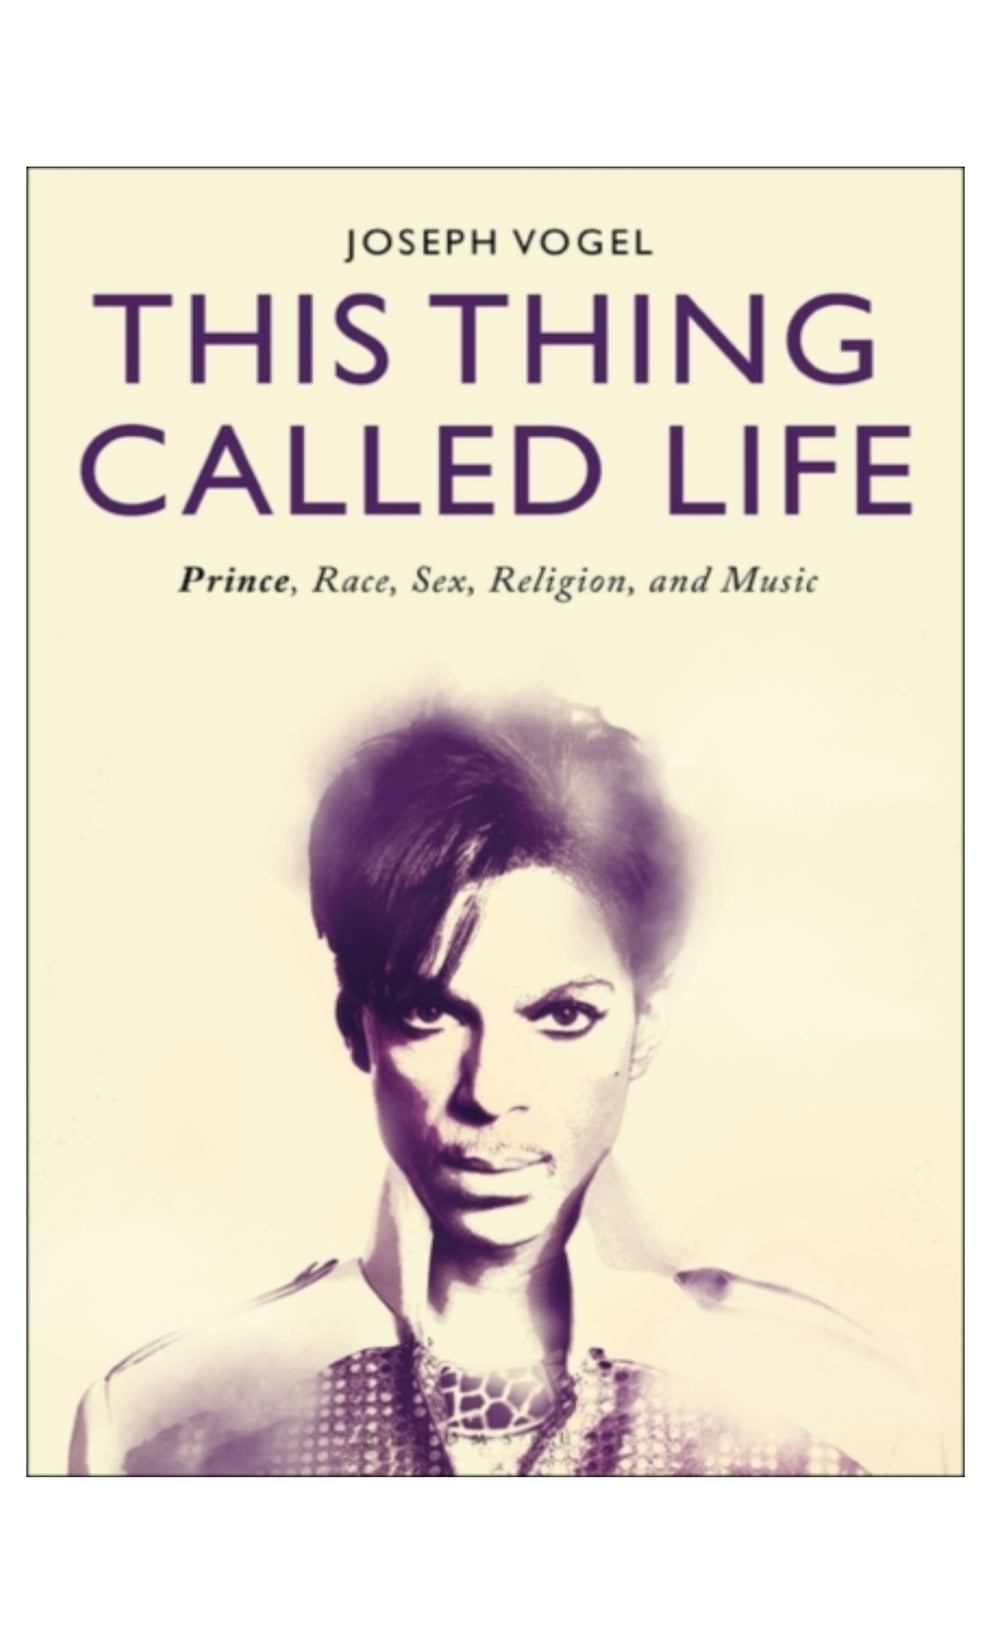 This Thing Called Life : Prince, Race, Sex, Religion, and Music by Joseph Vogel Book Hardback New